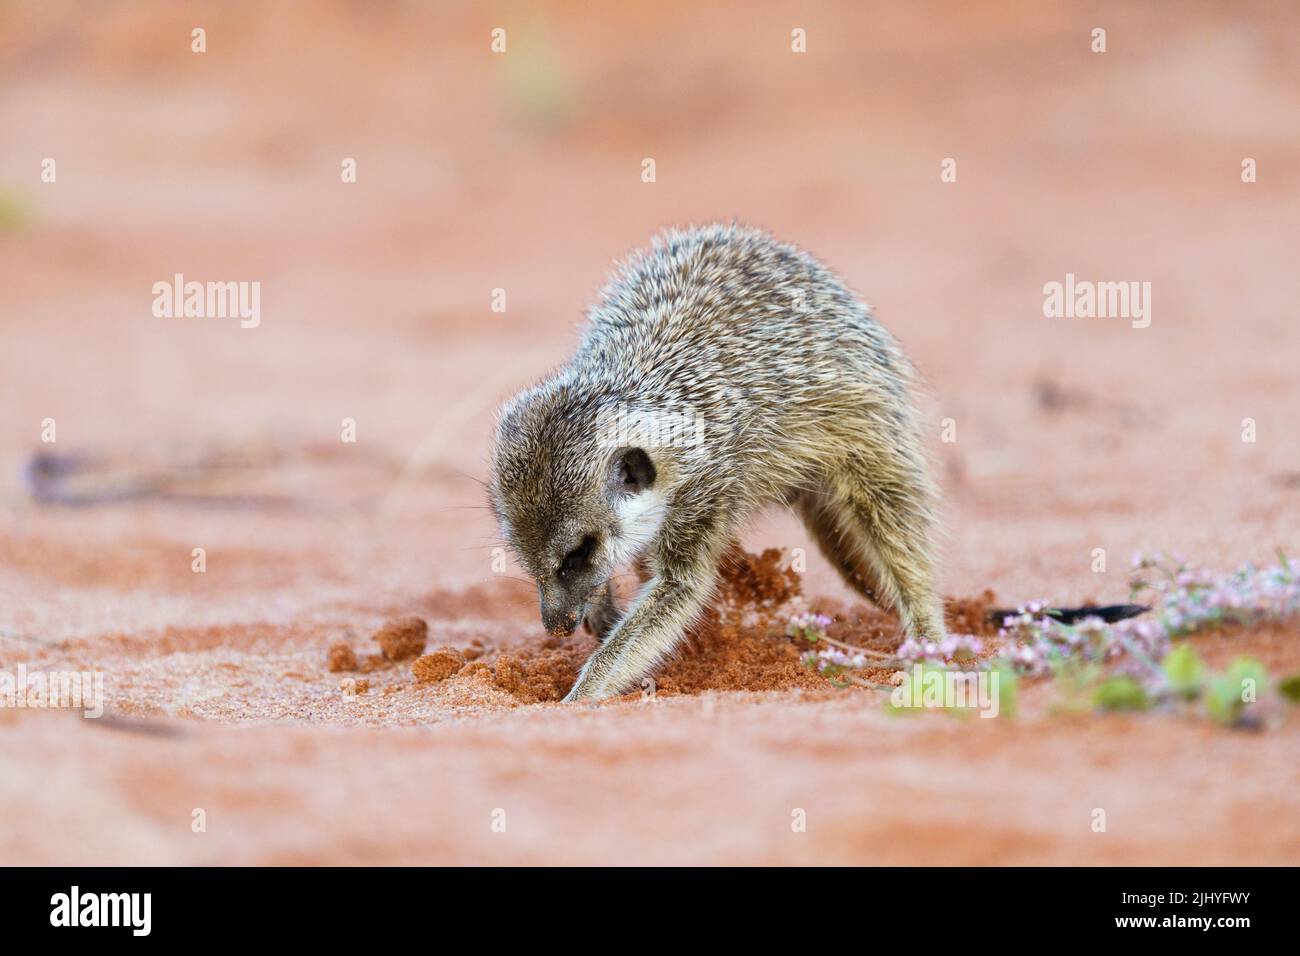 Closeup of baby meerkat digging for food in red soil. Front side view of the funny meerkat. Kalahari, Transfrontier National Park, South Africa Stock Photo